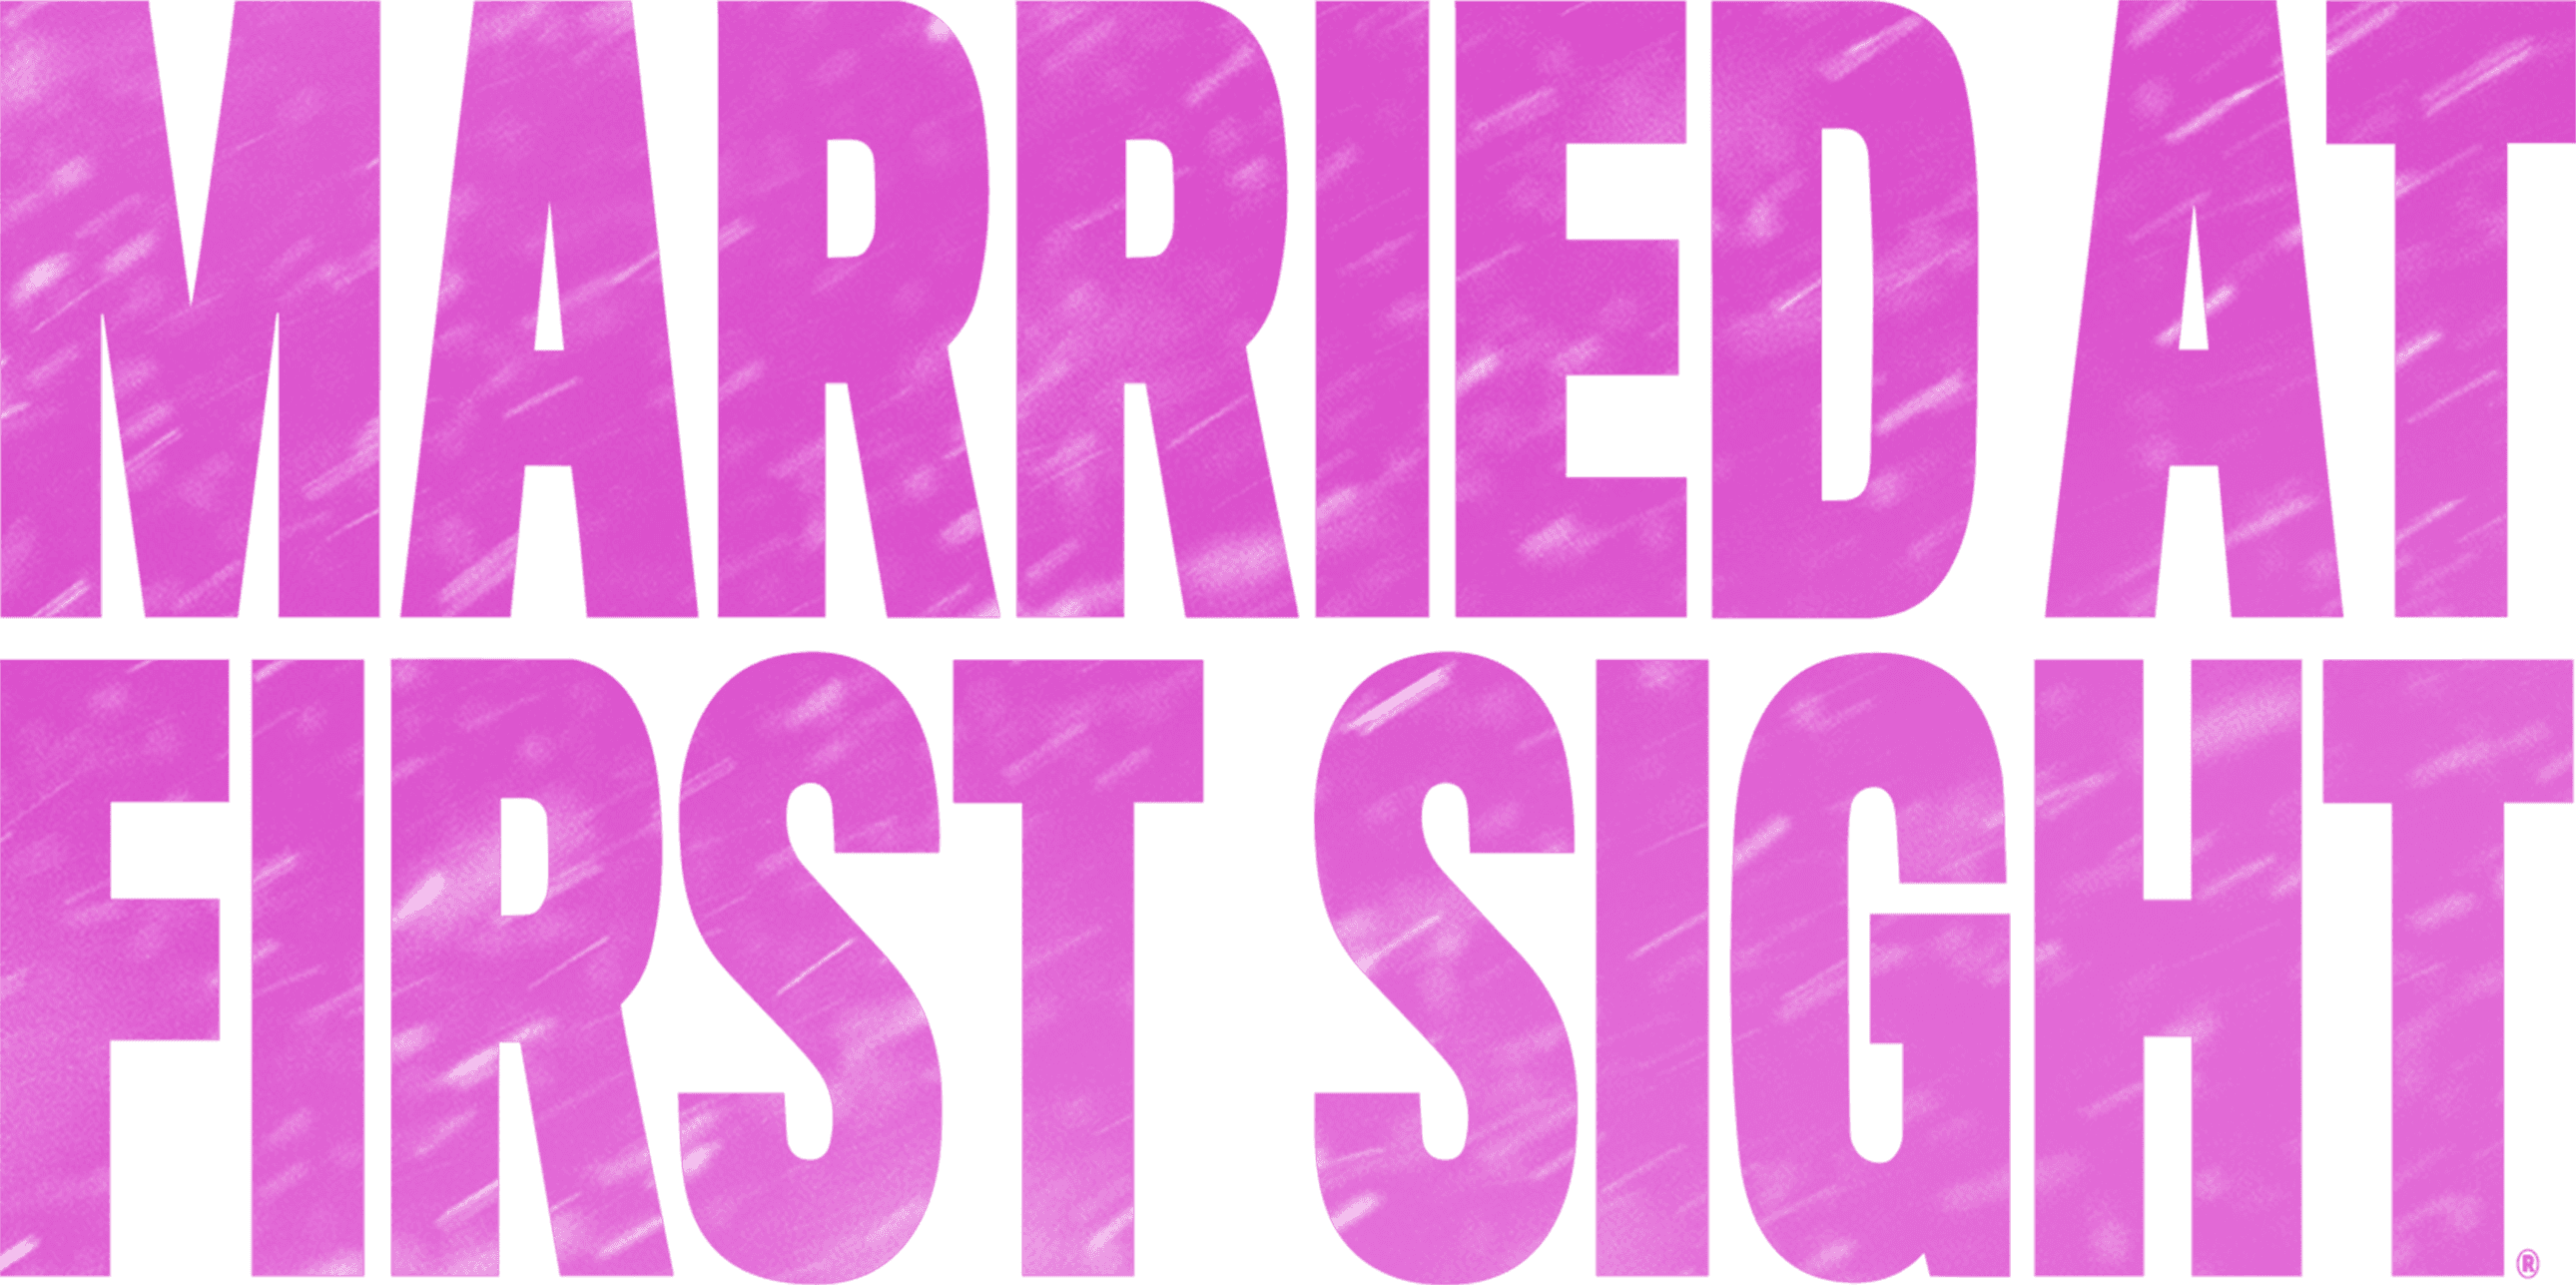 Married at First Sight logo